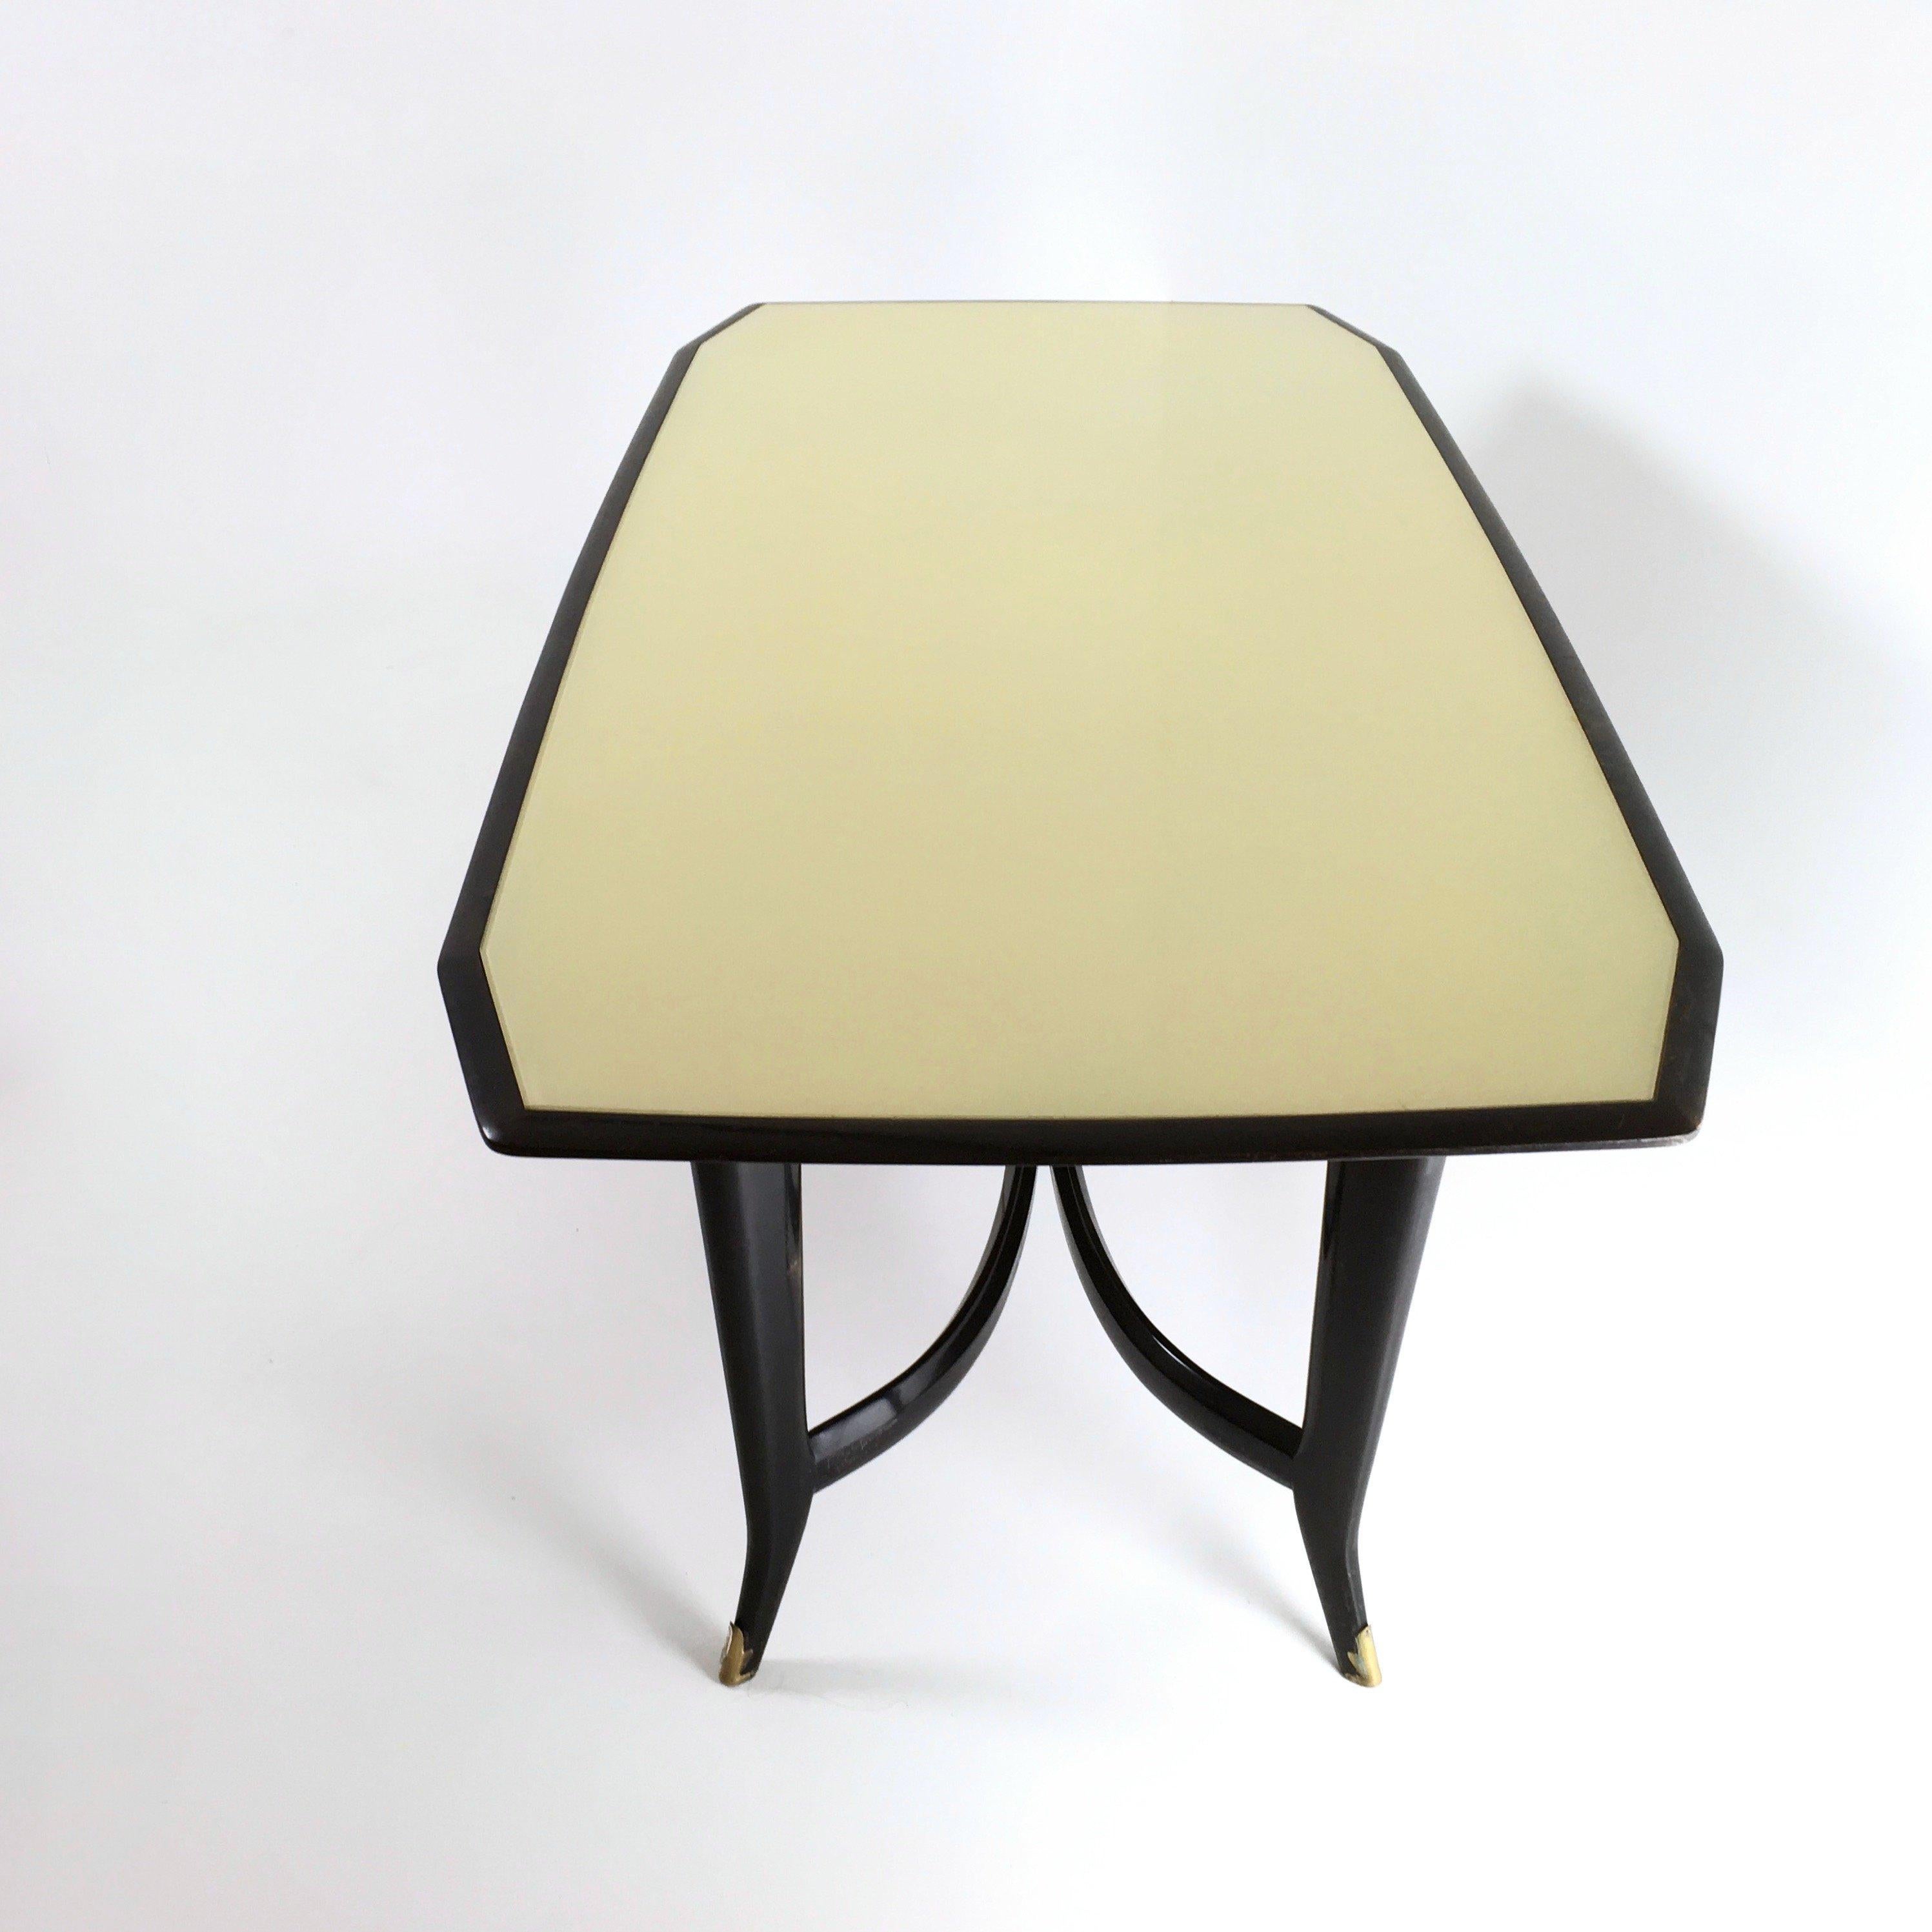 Italian Ebonized Beech Dining Table ascribable to Ulrich with a Glass Top, Italy